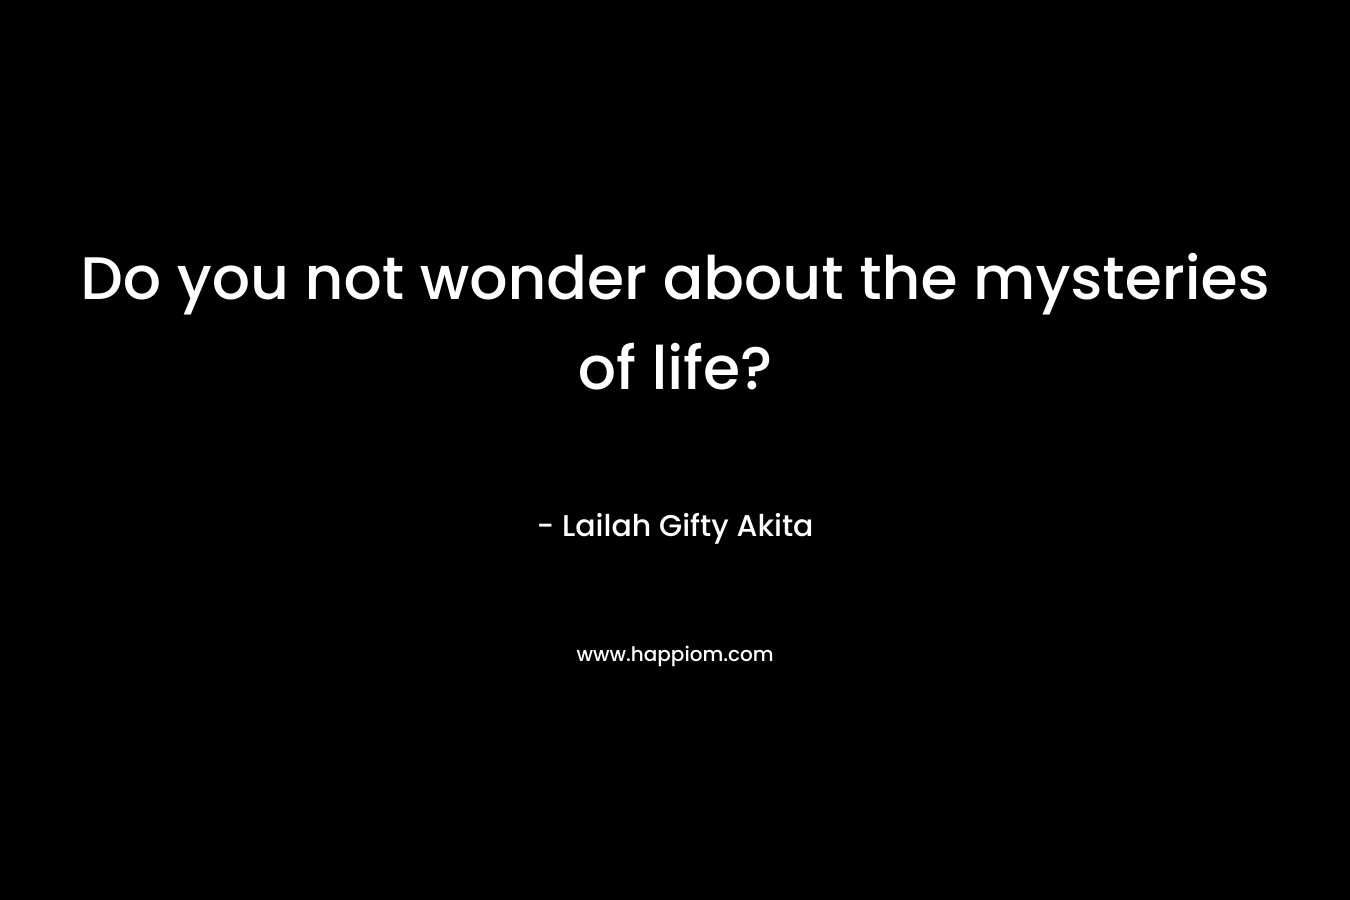 Do you not wonder about the mysteries of life?